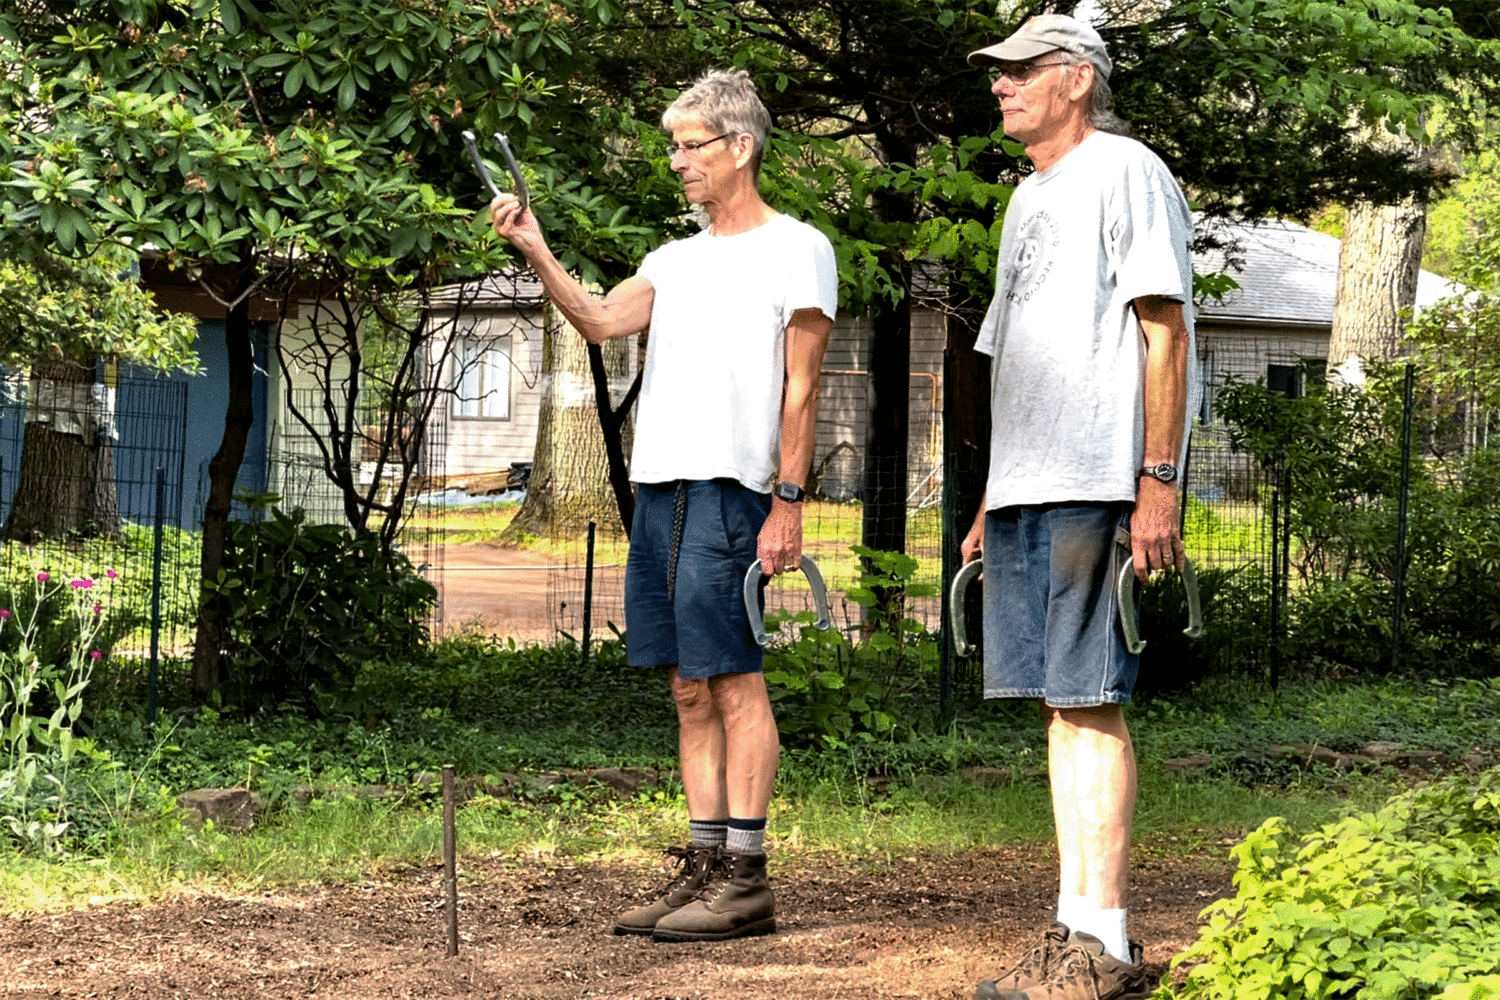 Paul and Rick playing horseshoes in the front yard - photo by Peggi Fournier